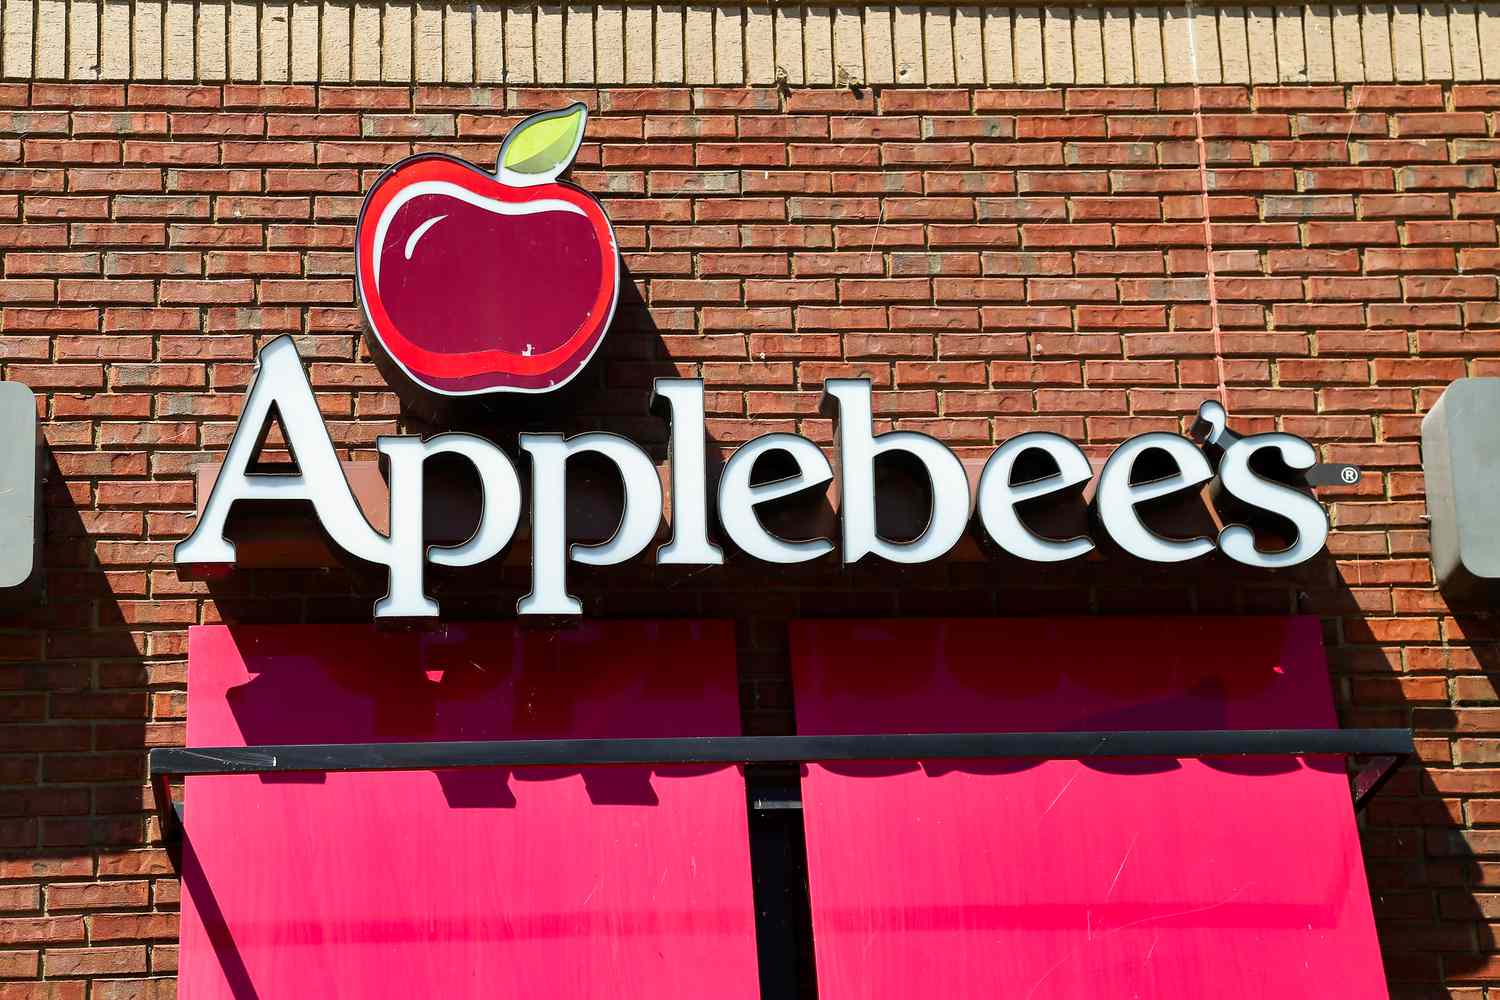 Applebee's has announced new entrees being added to their menu. (Photo: Food & Wine)